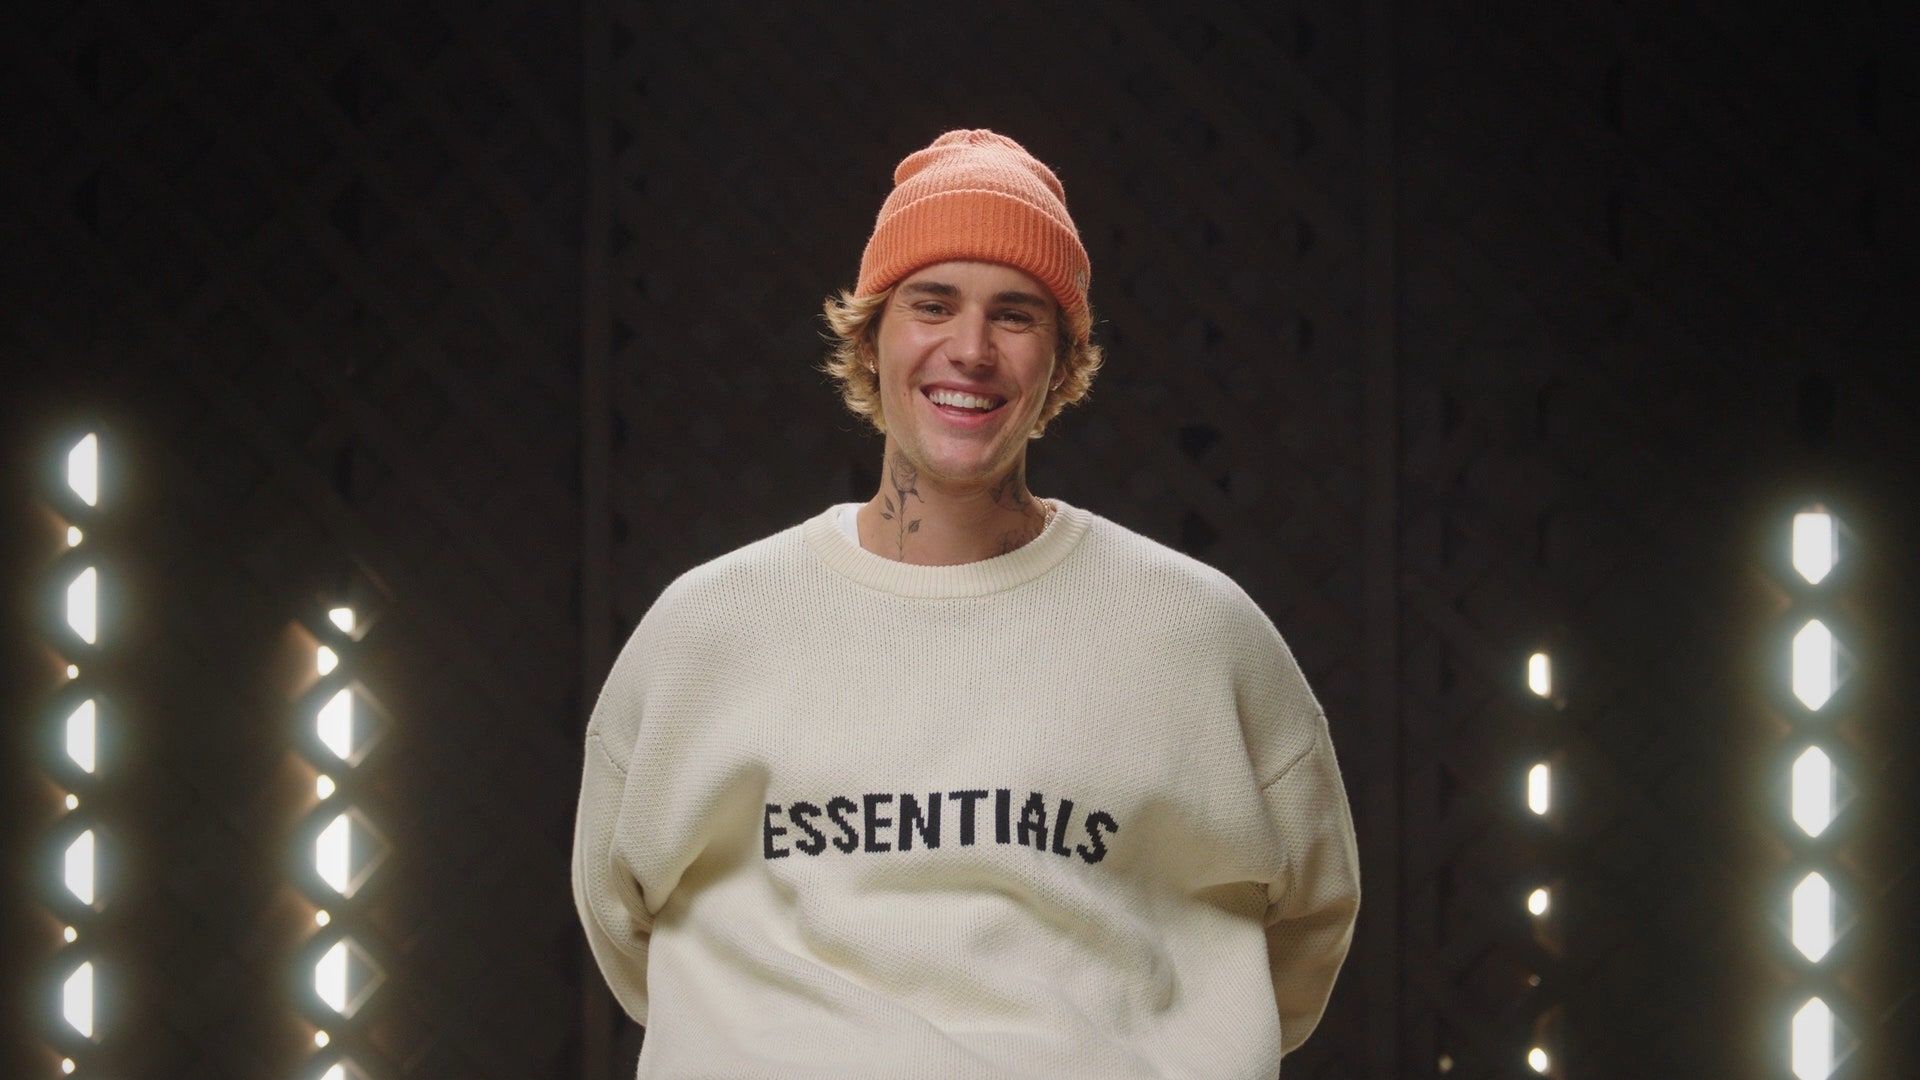 The New Justin Bieber Documentary Series Is His Most Intimate Yet